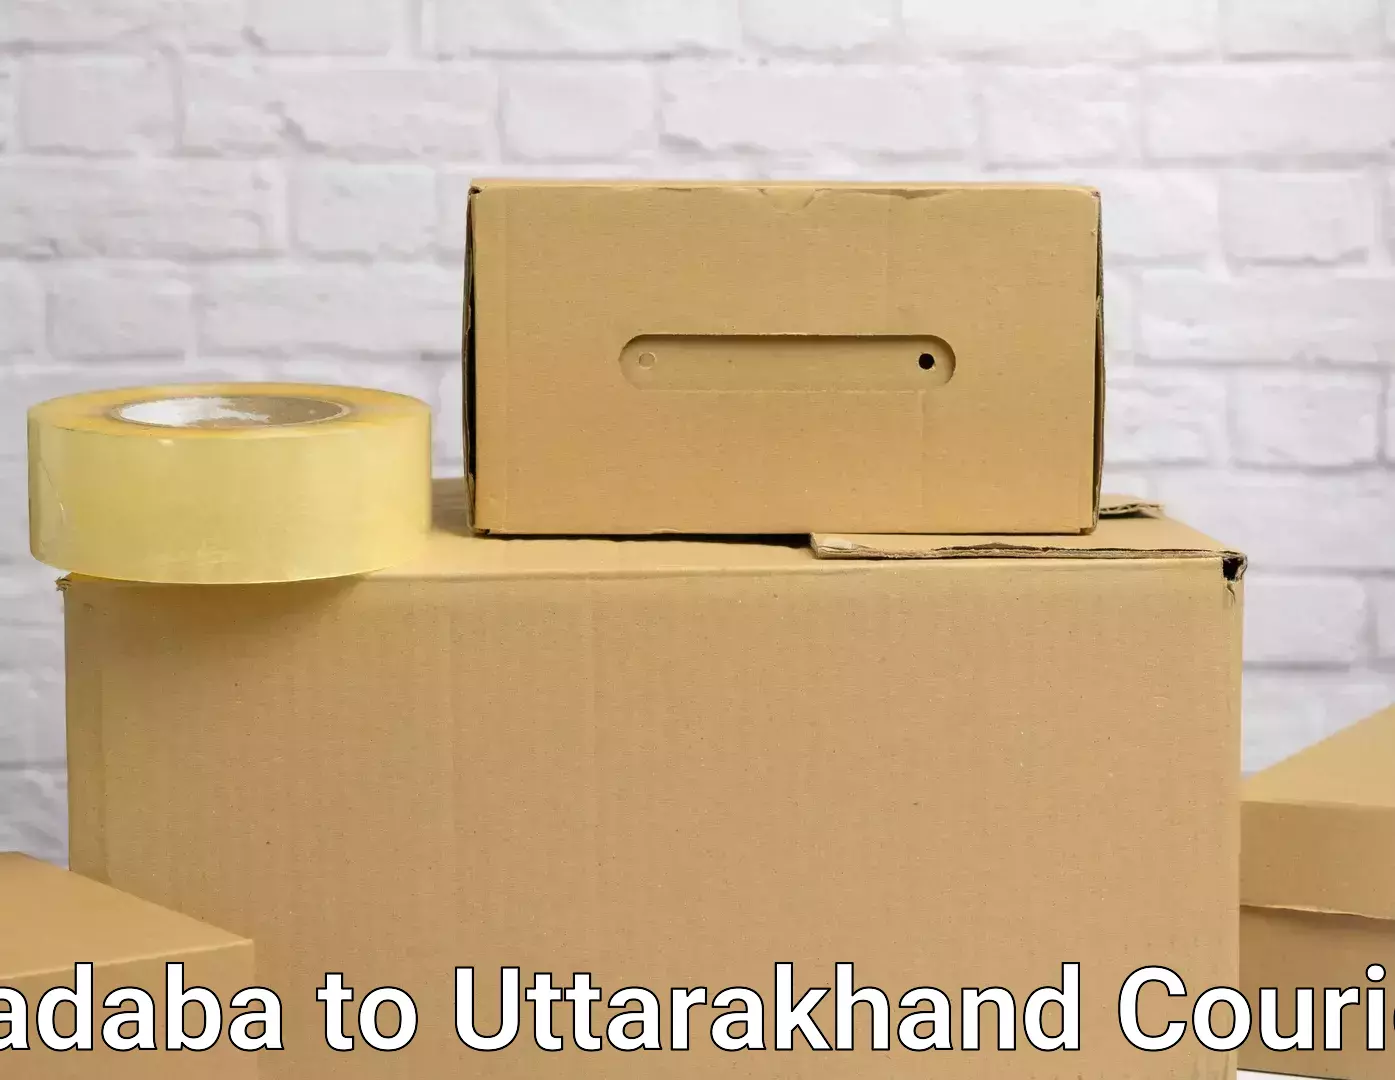 Moving and packing experts Kadaba to Tehri